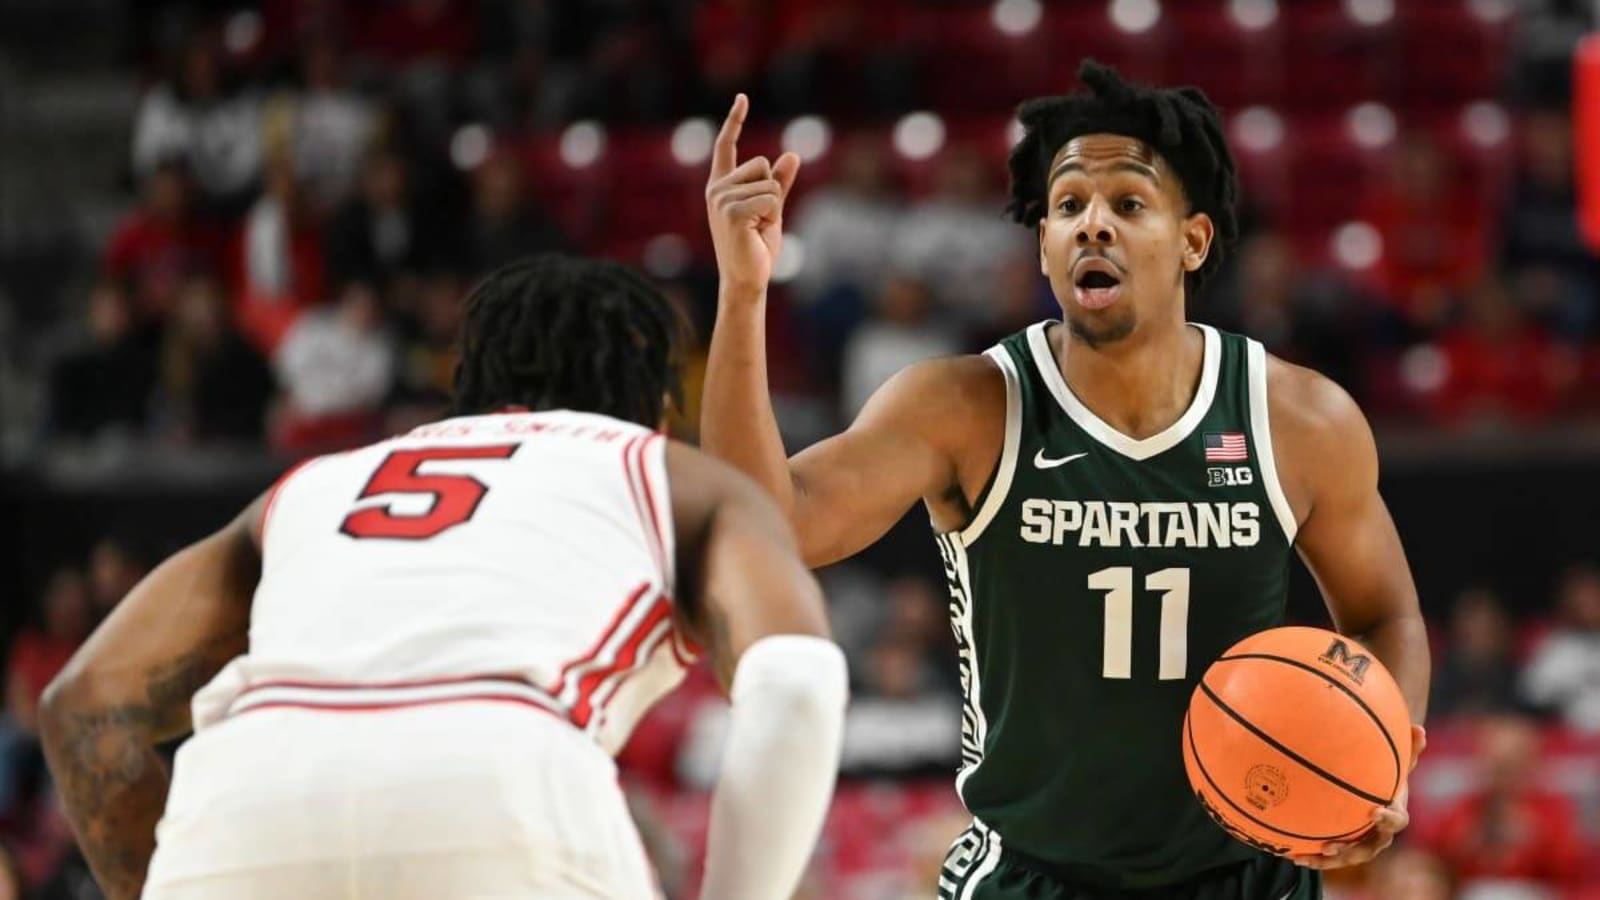 5 Observations: Michigan State clings to victory over Maryland in closing seconds